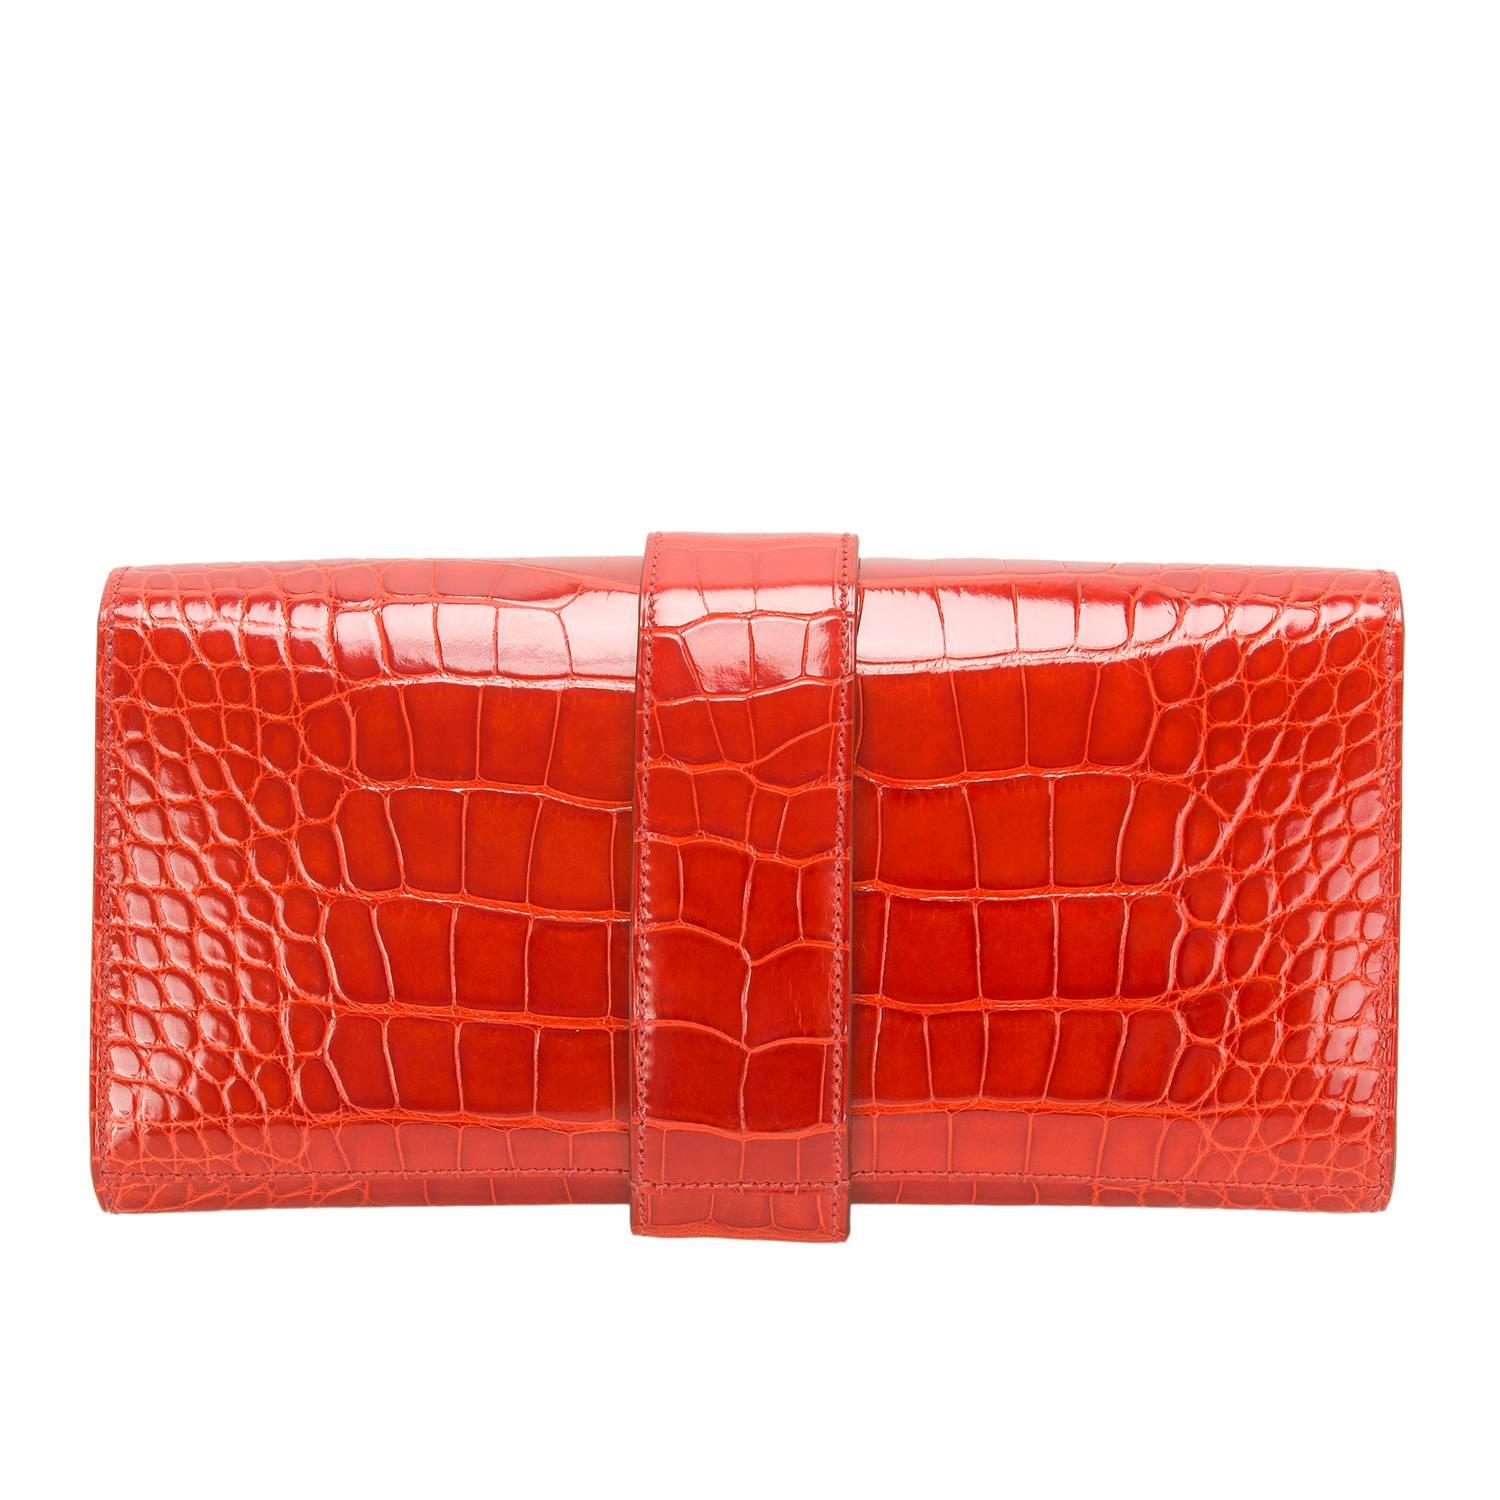  	
Hermes Sanguine Medor 23cm clutch in shiny alligator with gold hardware.

This rare Hermes style features tonal stitching, front flap, gold studded hardware, and an adjustable wrap around gold metal closure.

The interior is lined in